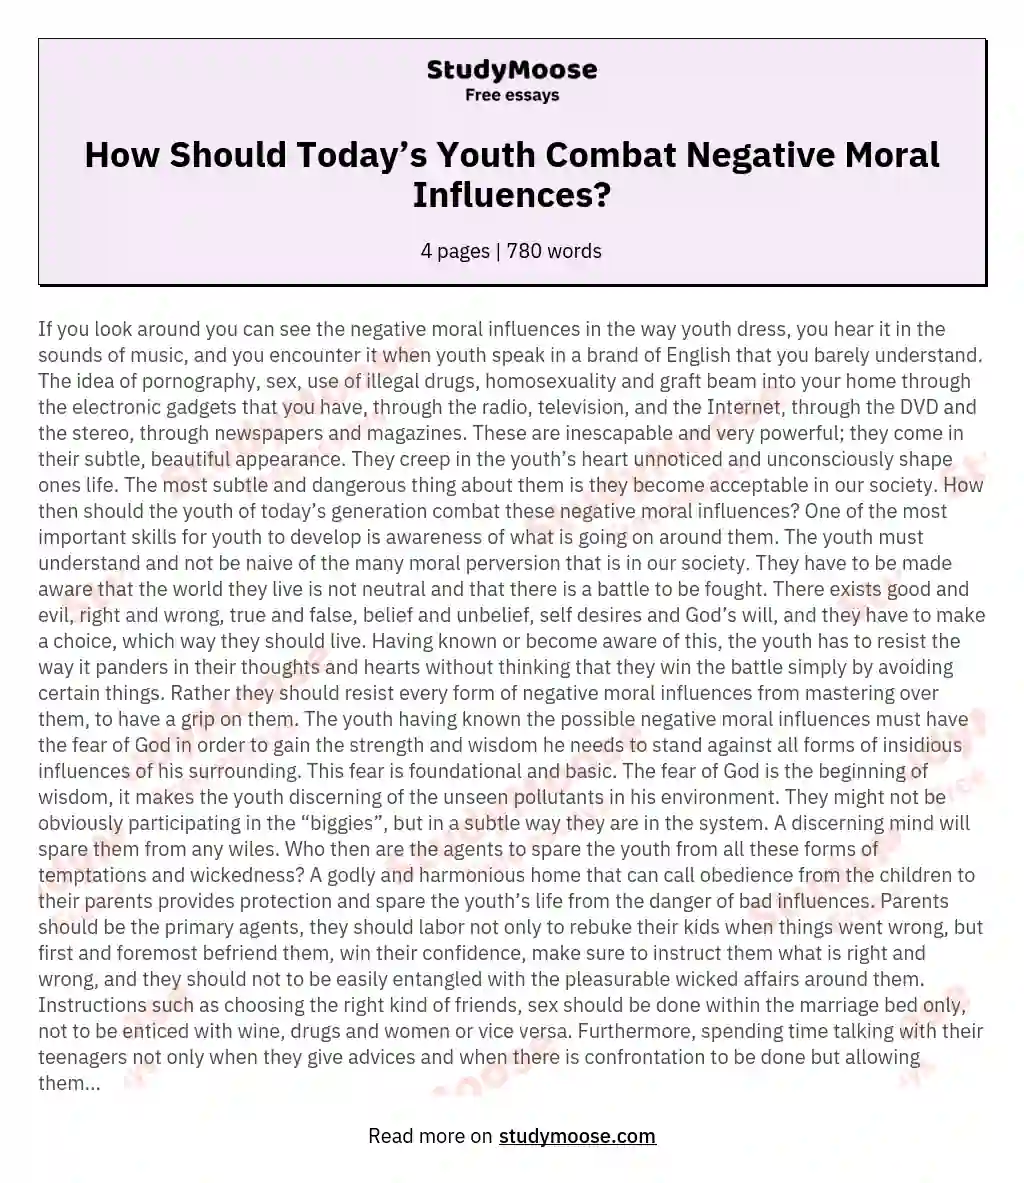 How Should Today’s Youth Combat Negative Moral Influences? essay